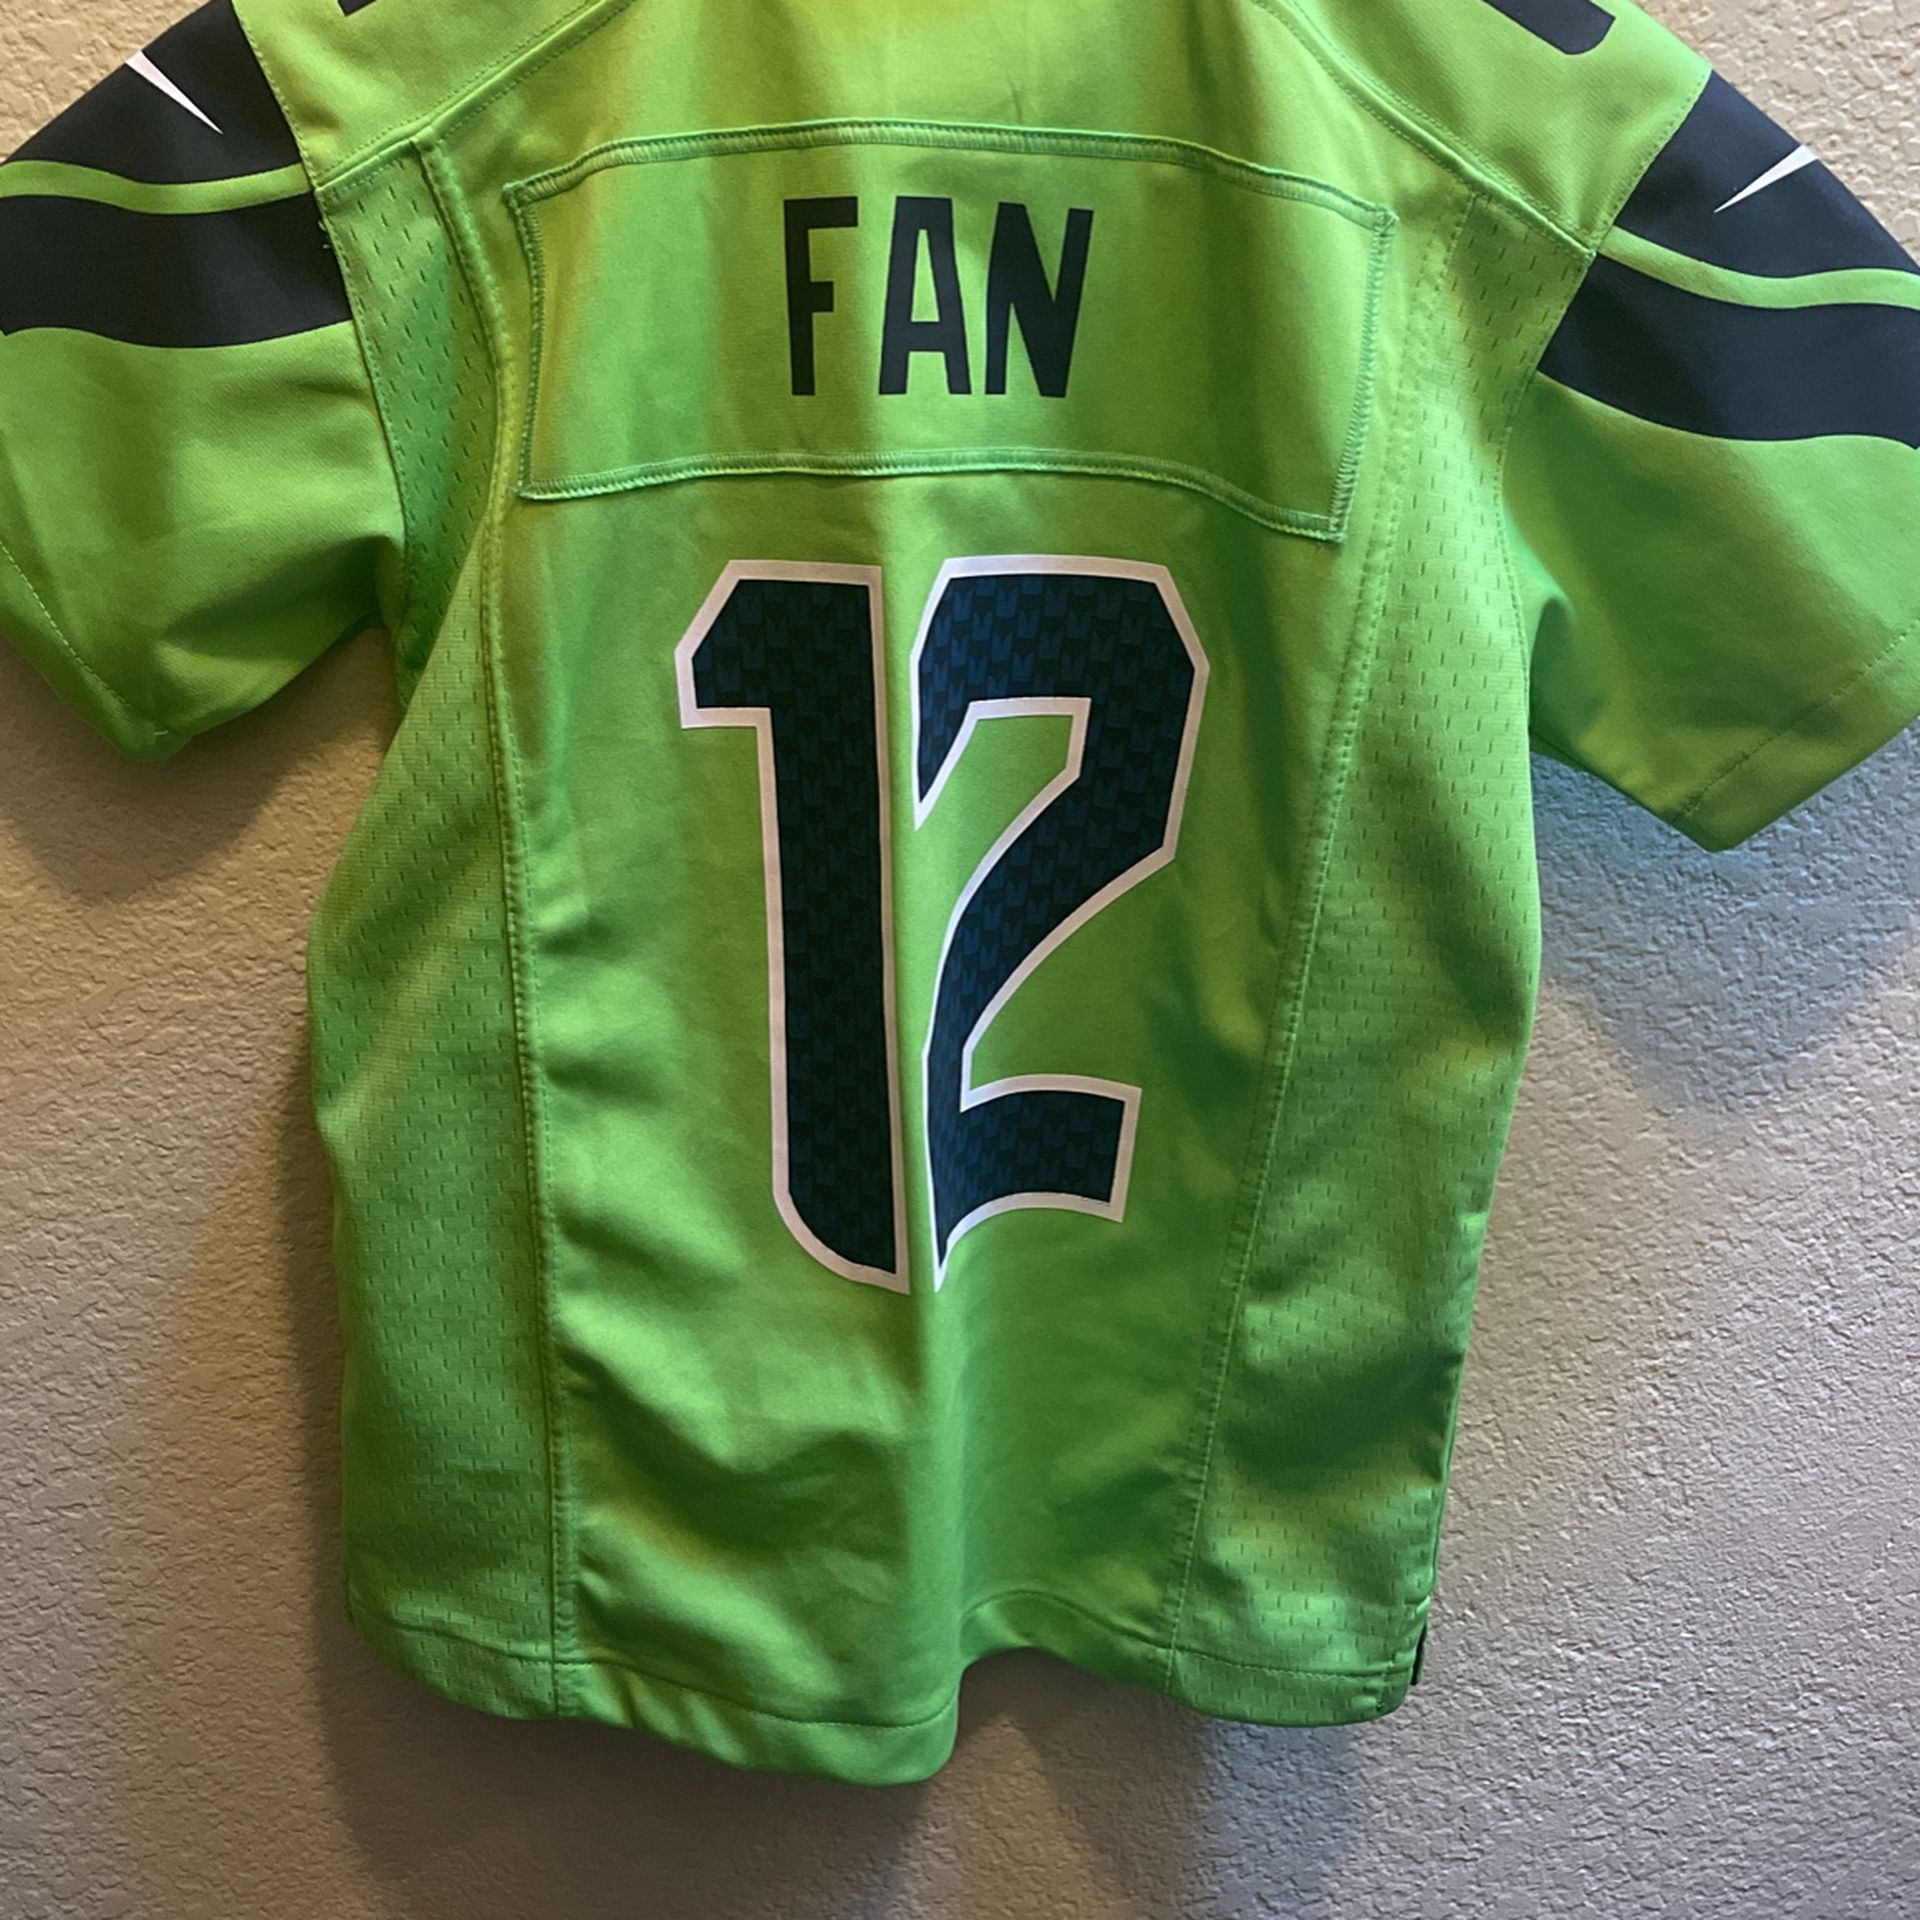 Seattle Seahawks Green Color Rush 12 Jersey Youth S for Sale in Covington,  WA - OfferUp